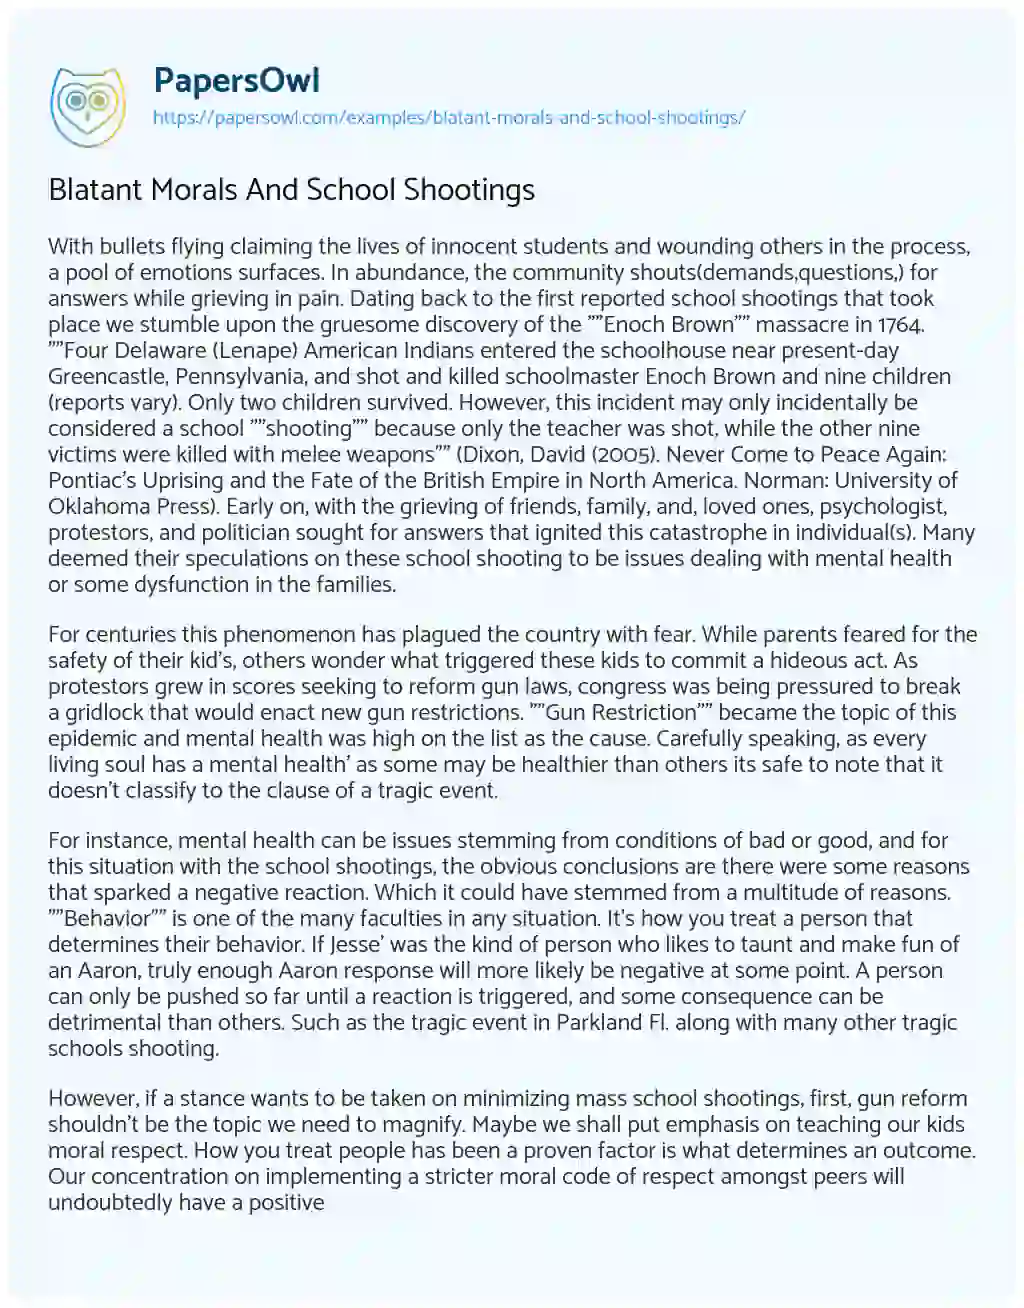 Essay on Blatant Morals and School Shootings